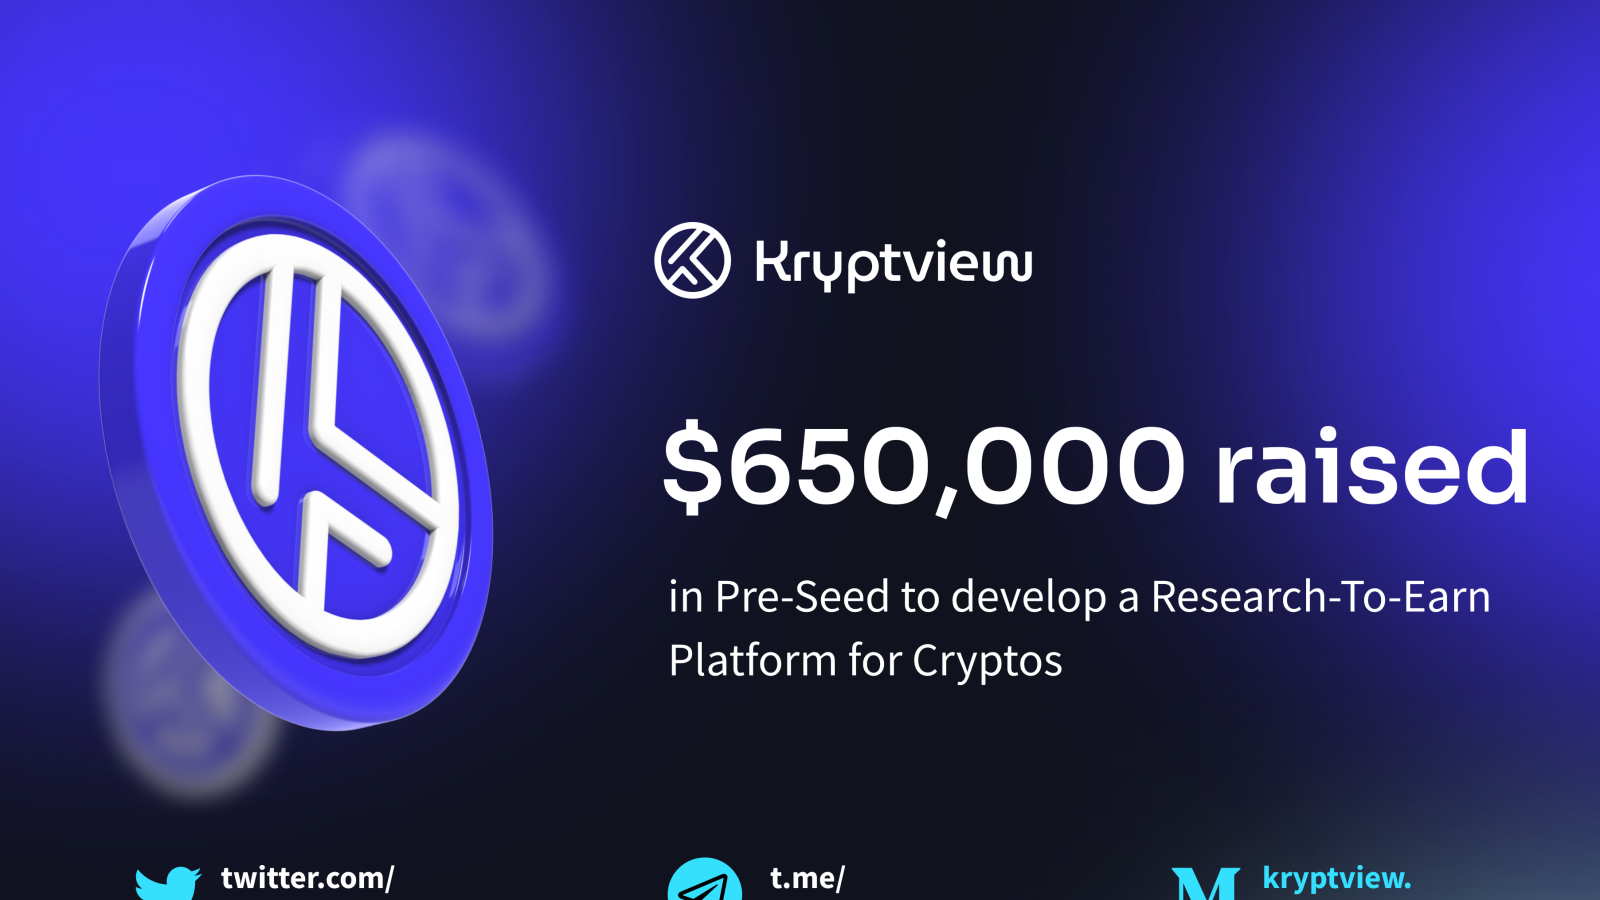 Kryptview Raises $650,000 in Pre-Seed to Develop a Community-Driven Crypto Research Platform